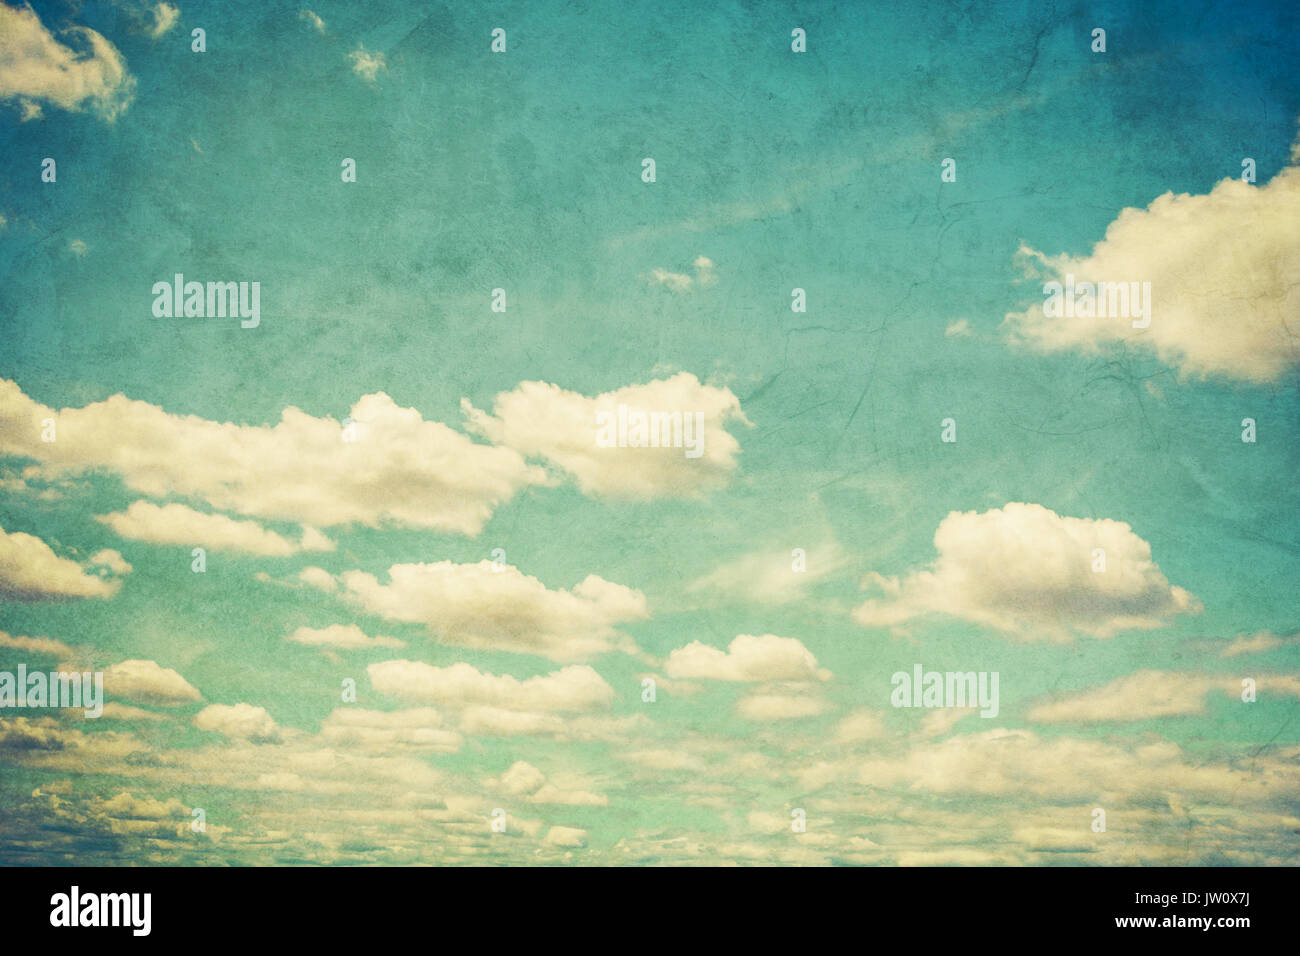 Grunge blue sky and white clouds with vintage effect. Stock Photo